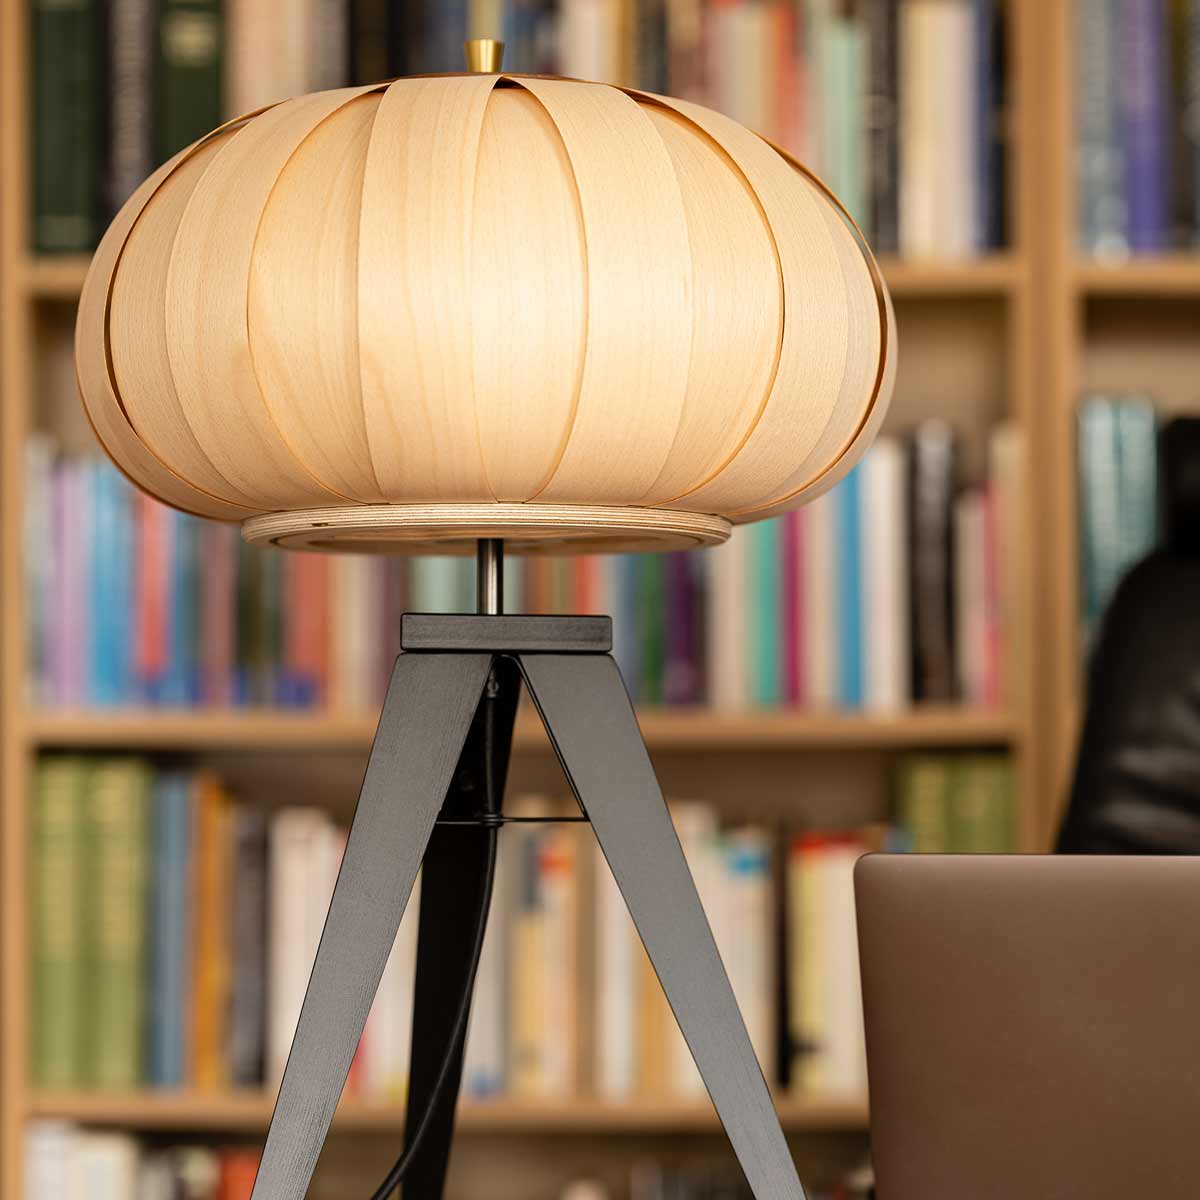 The Baby Bloom Tripod Lamp can also be a great  luxury desk lamp and is sold by South Charlotte Fine Lighting